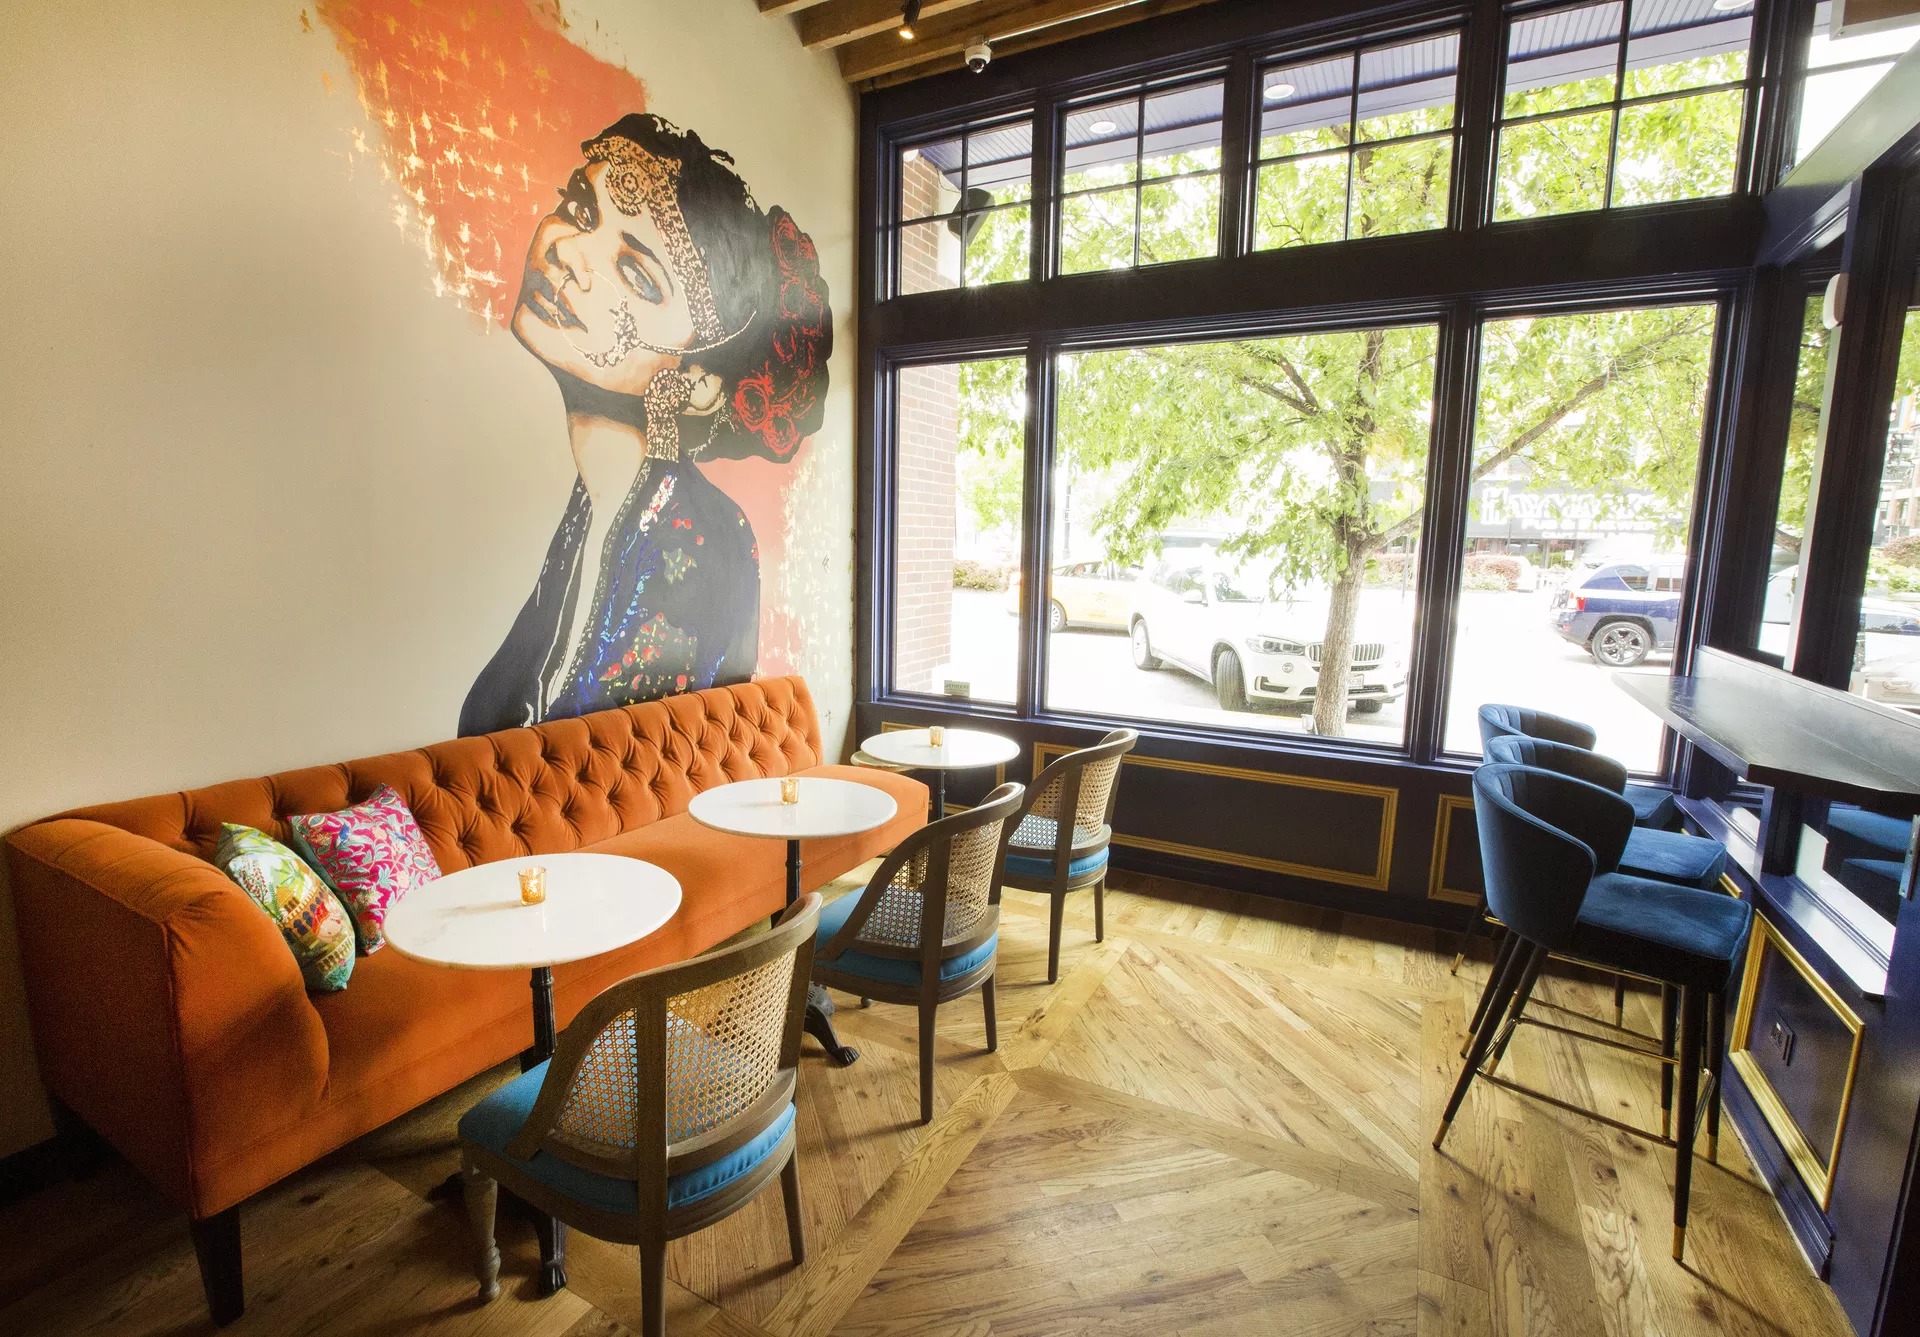 Rooh’s dining room features high top seating, an orange couch, and a painted mural called Christine by Jenny Vyas,